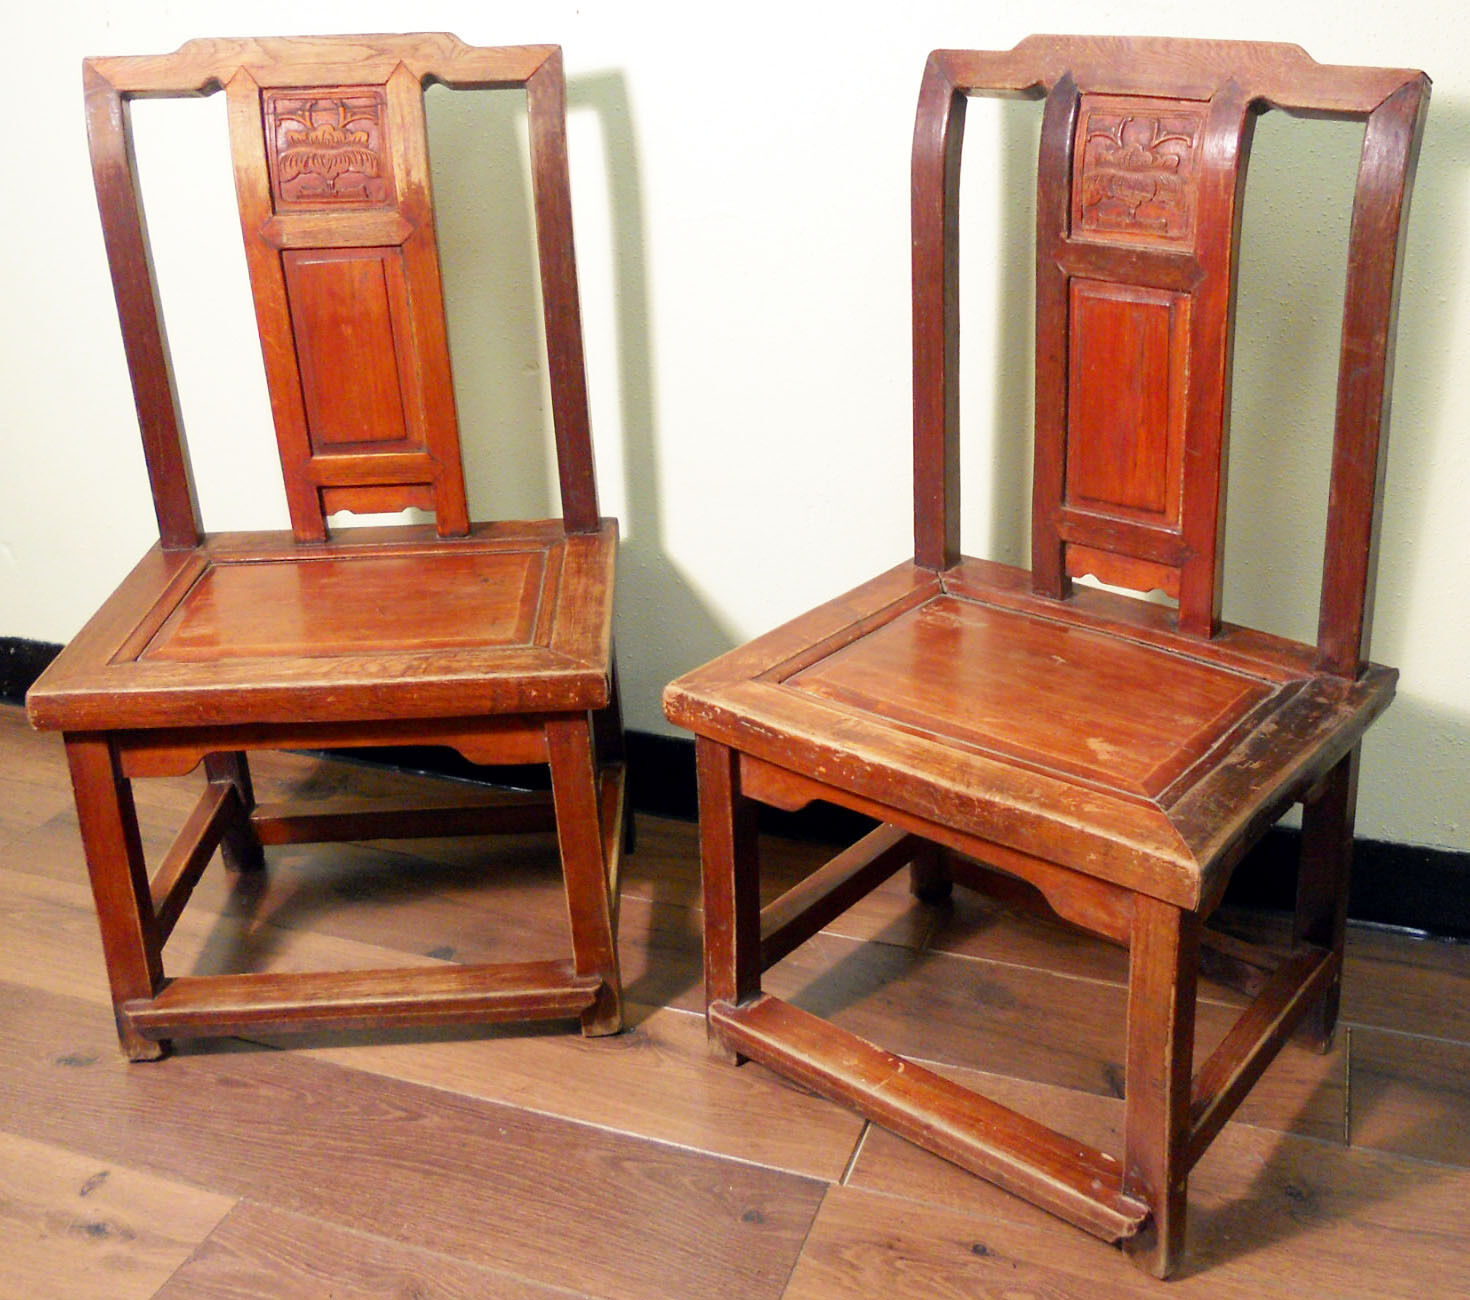 Primary image for Antique Chinese Ming Chairs (3307) (Pair), Zelkova Wood, Circa 1800-1849